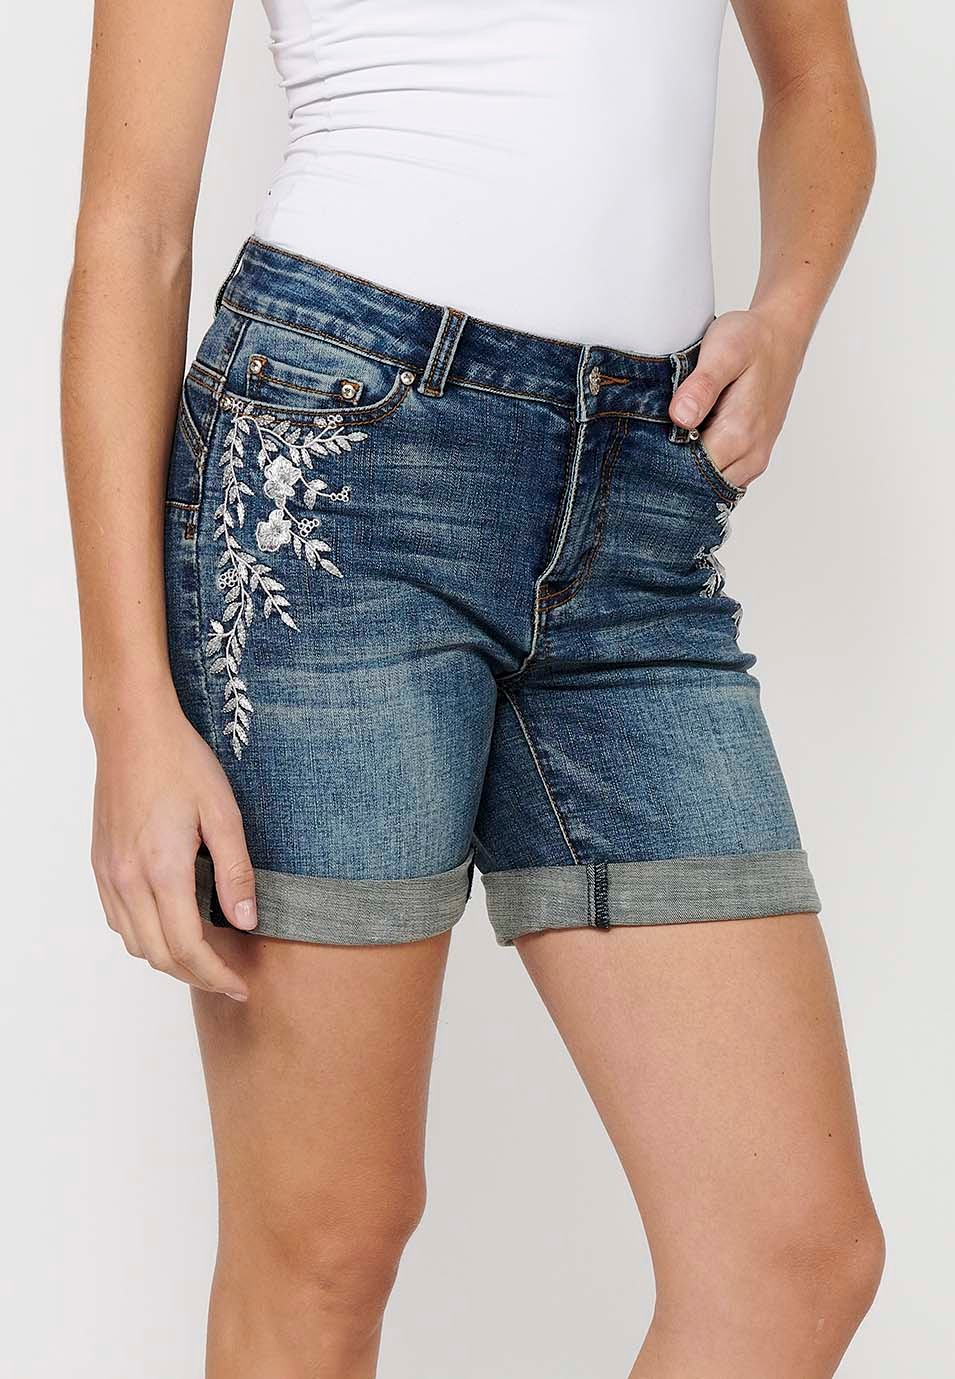 Short shorts with a turn-up finish with front zipper and button closure and blue floral embroidery for Women 1